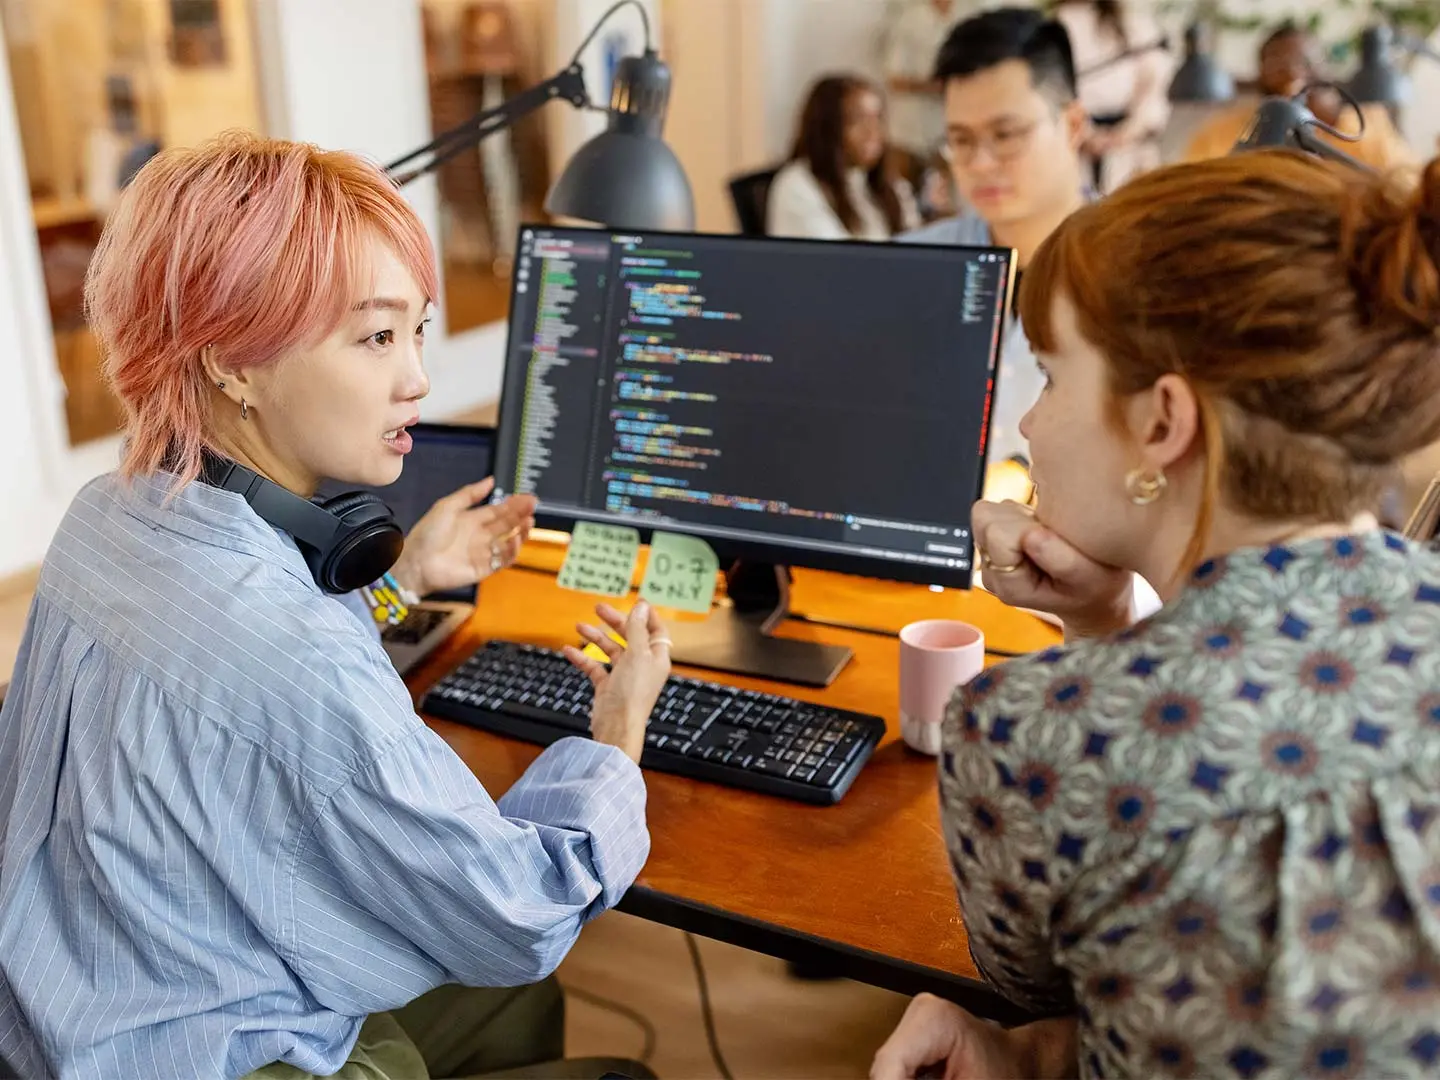 Female software developers discuss over the computer while sitting at a desk in the workplace. Creative businesswomen discuss the new coding program in the office.